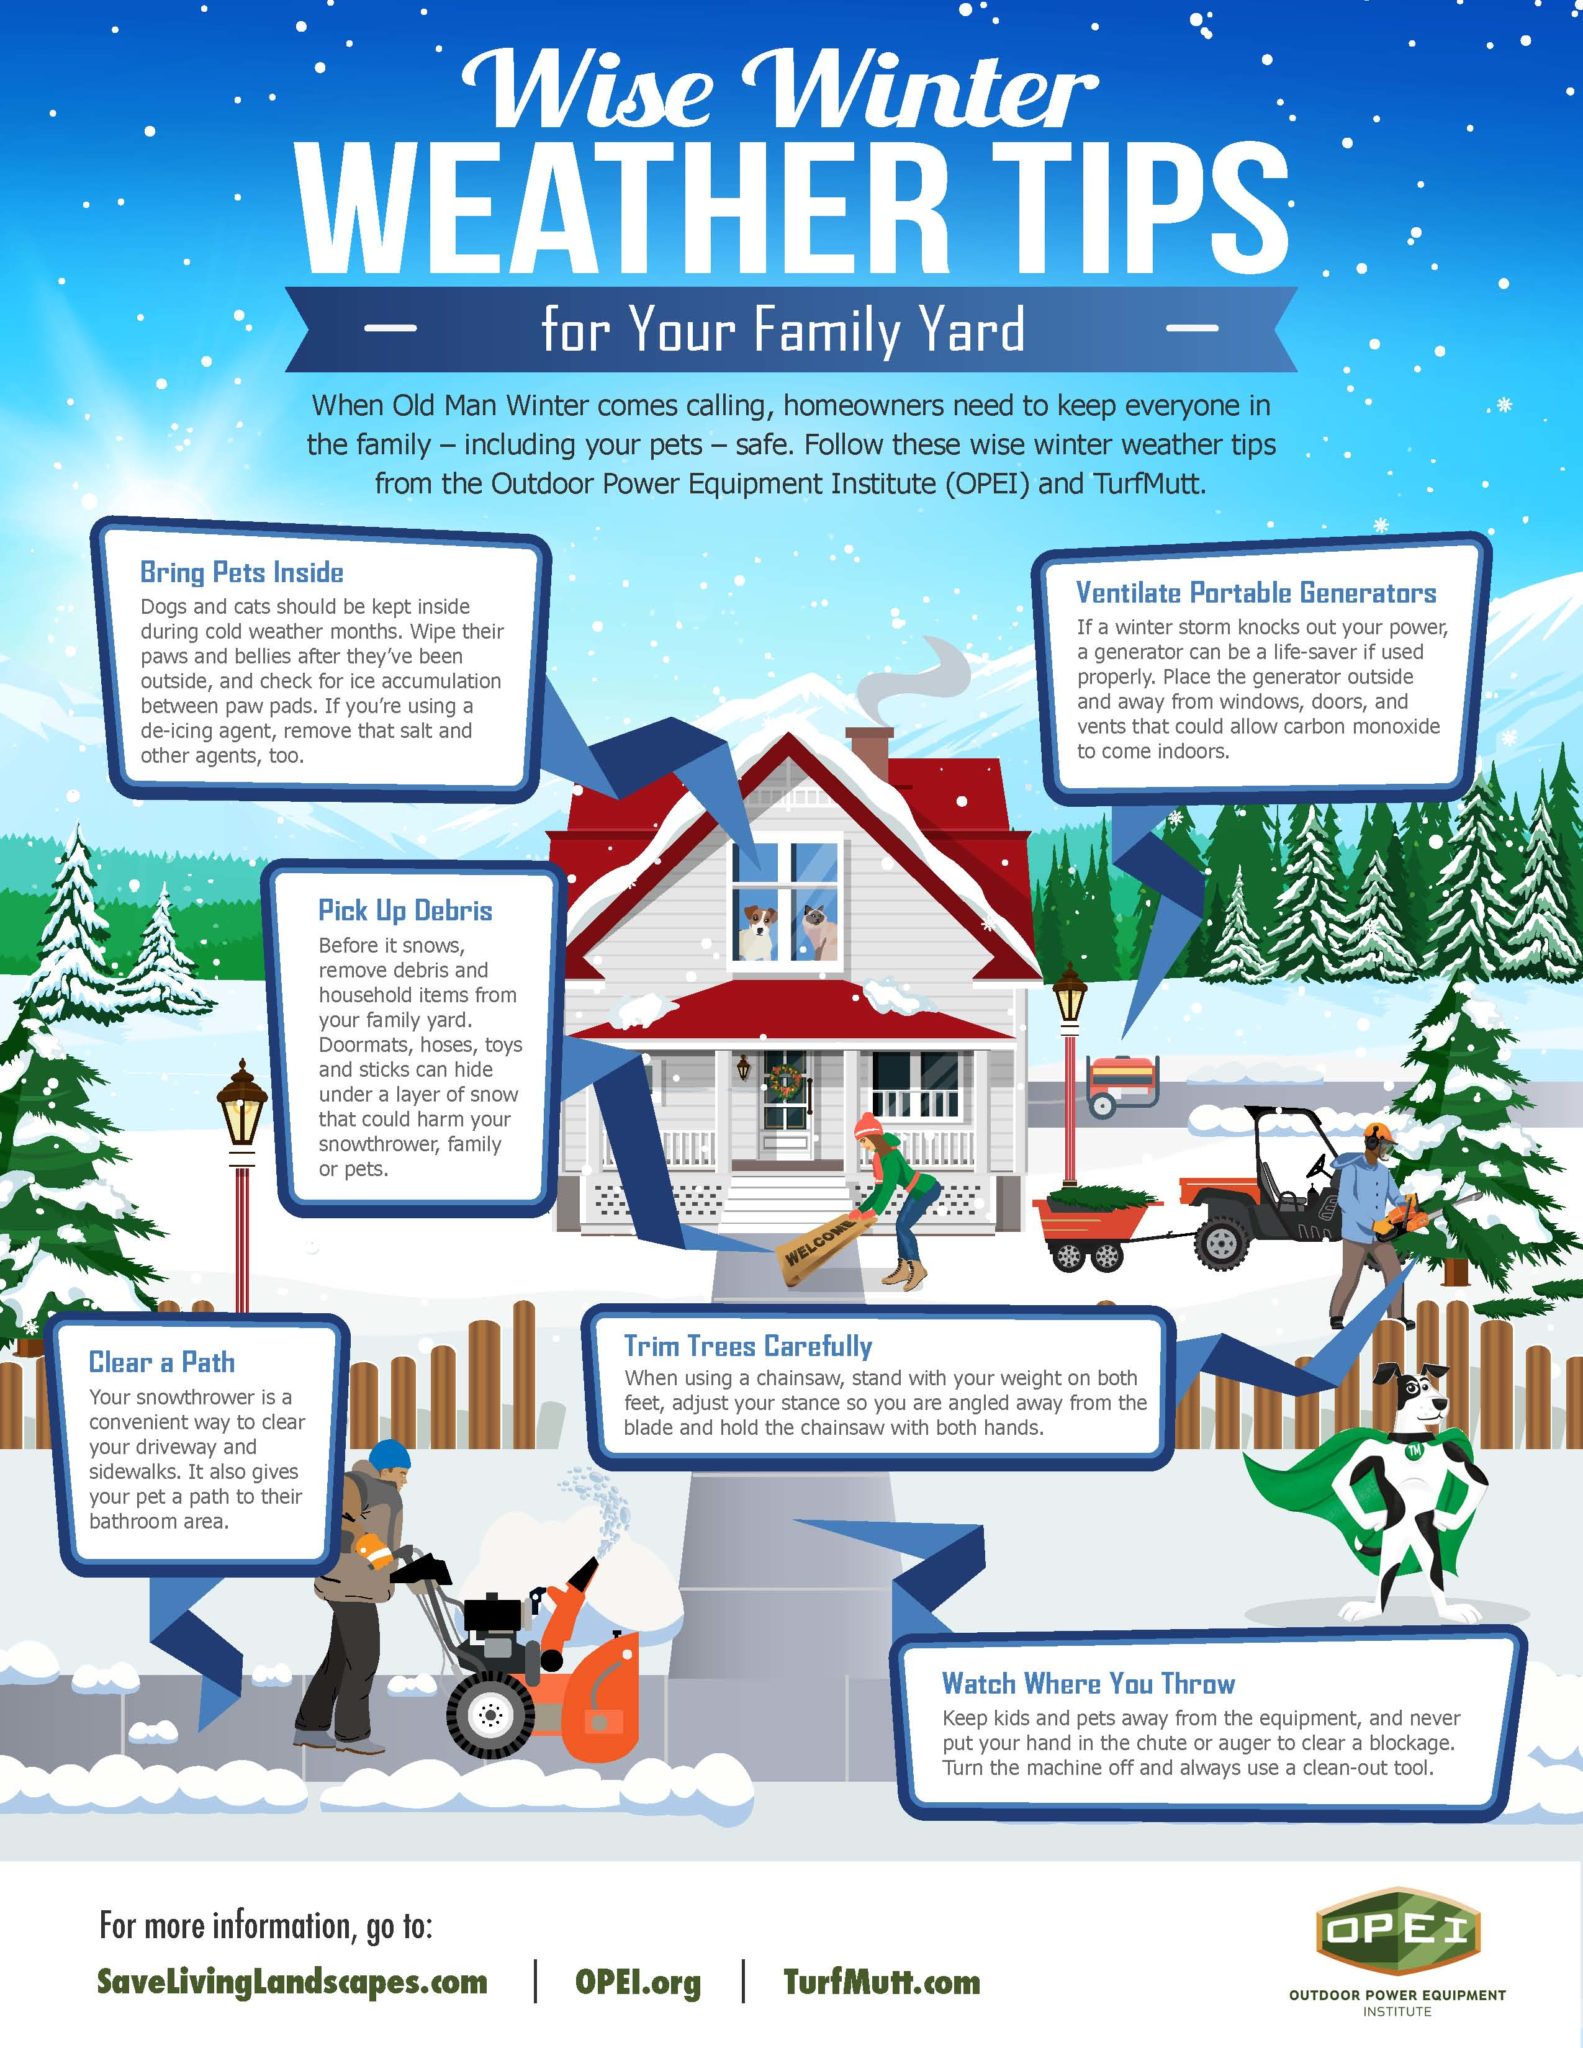 A WISE OPEI_Wise-Winter-Weather-Tips-for-Your-Family-Yard_FINAL